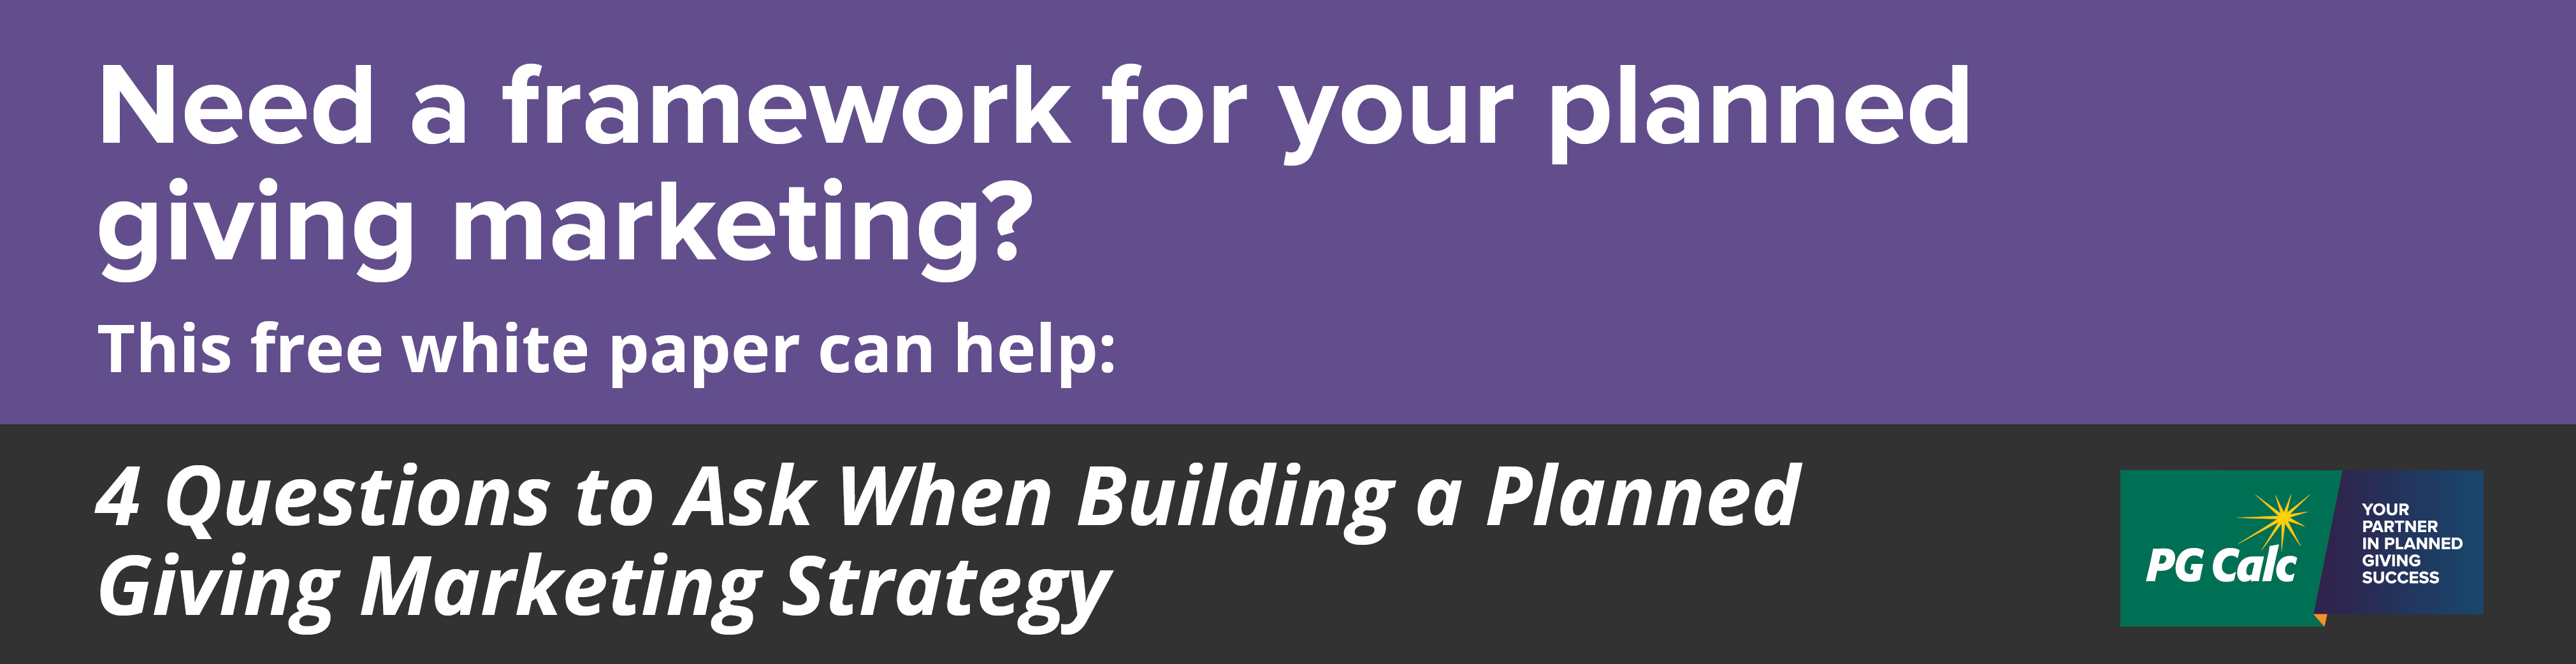 Need a framework for your planned givng marketing? Download our white paper: 4 Questions to Ask When Building a Planned Giving Marketing Strategy